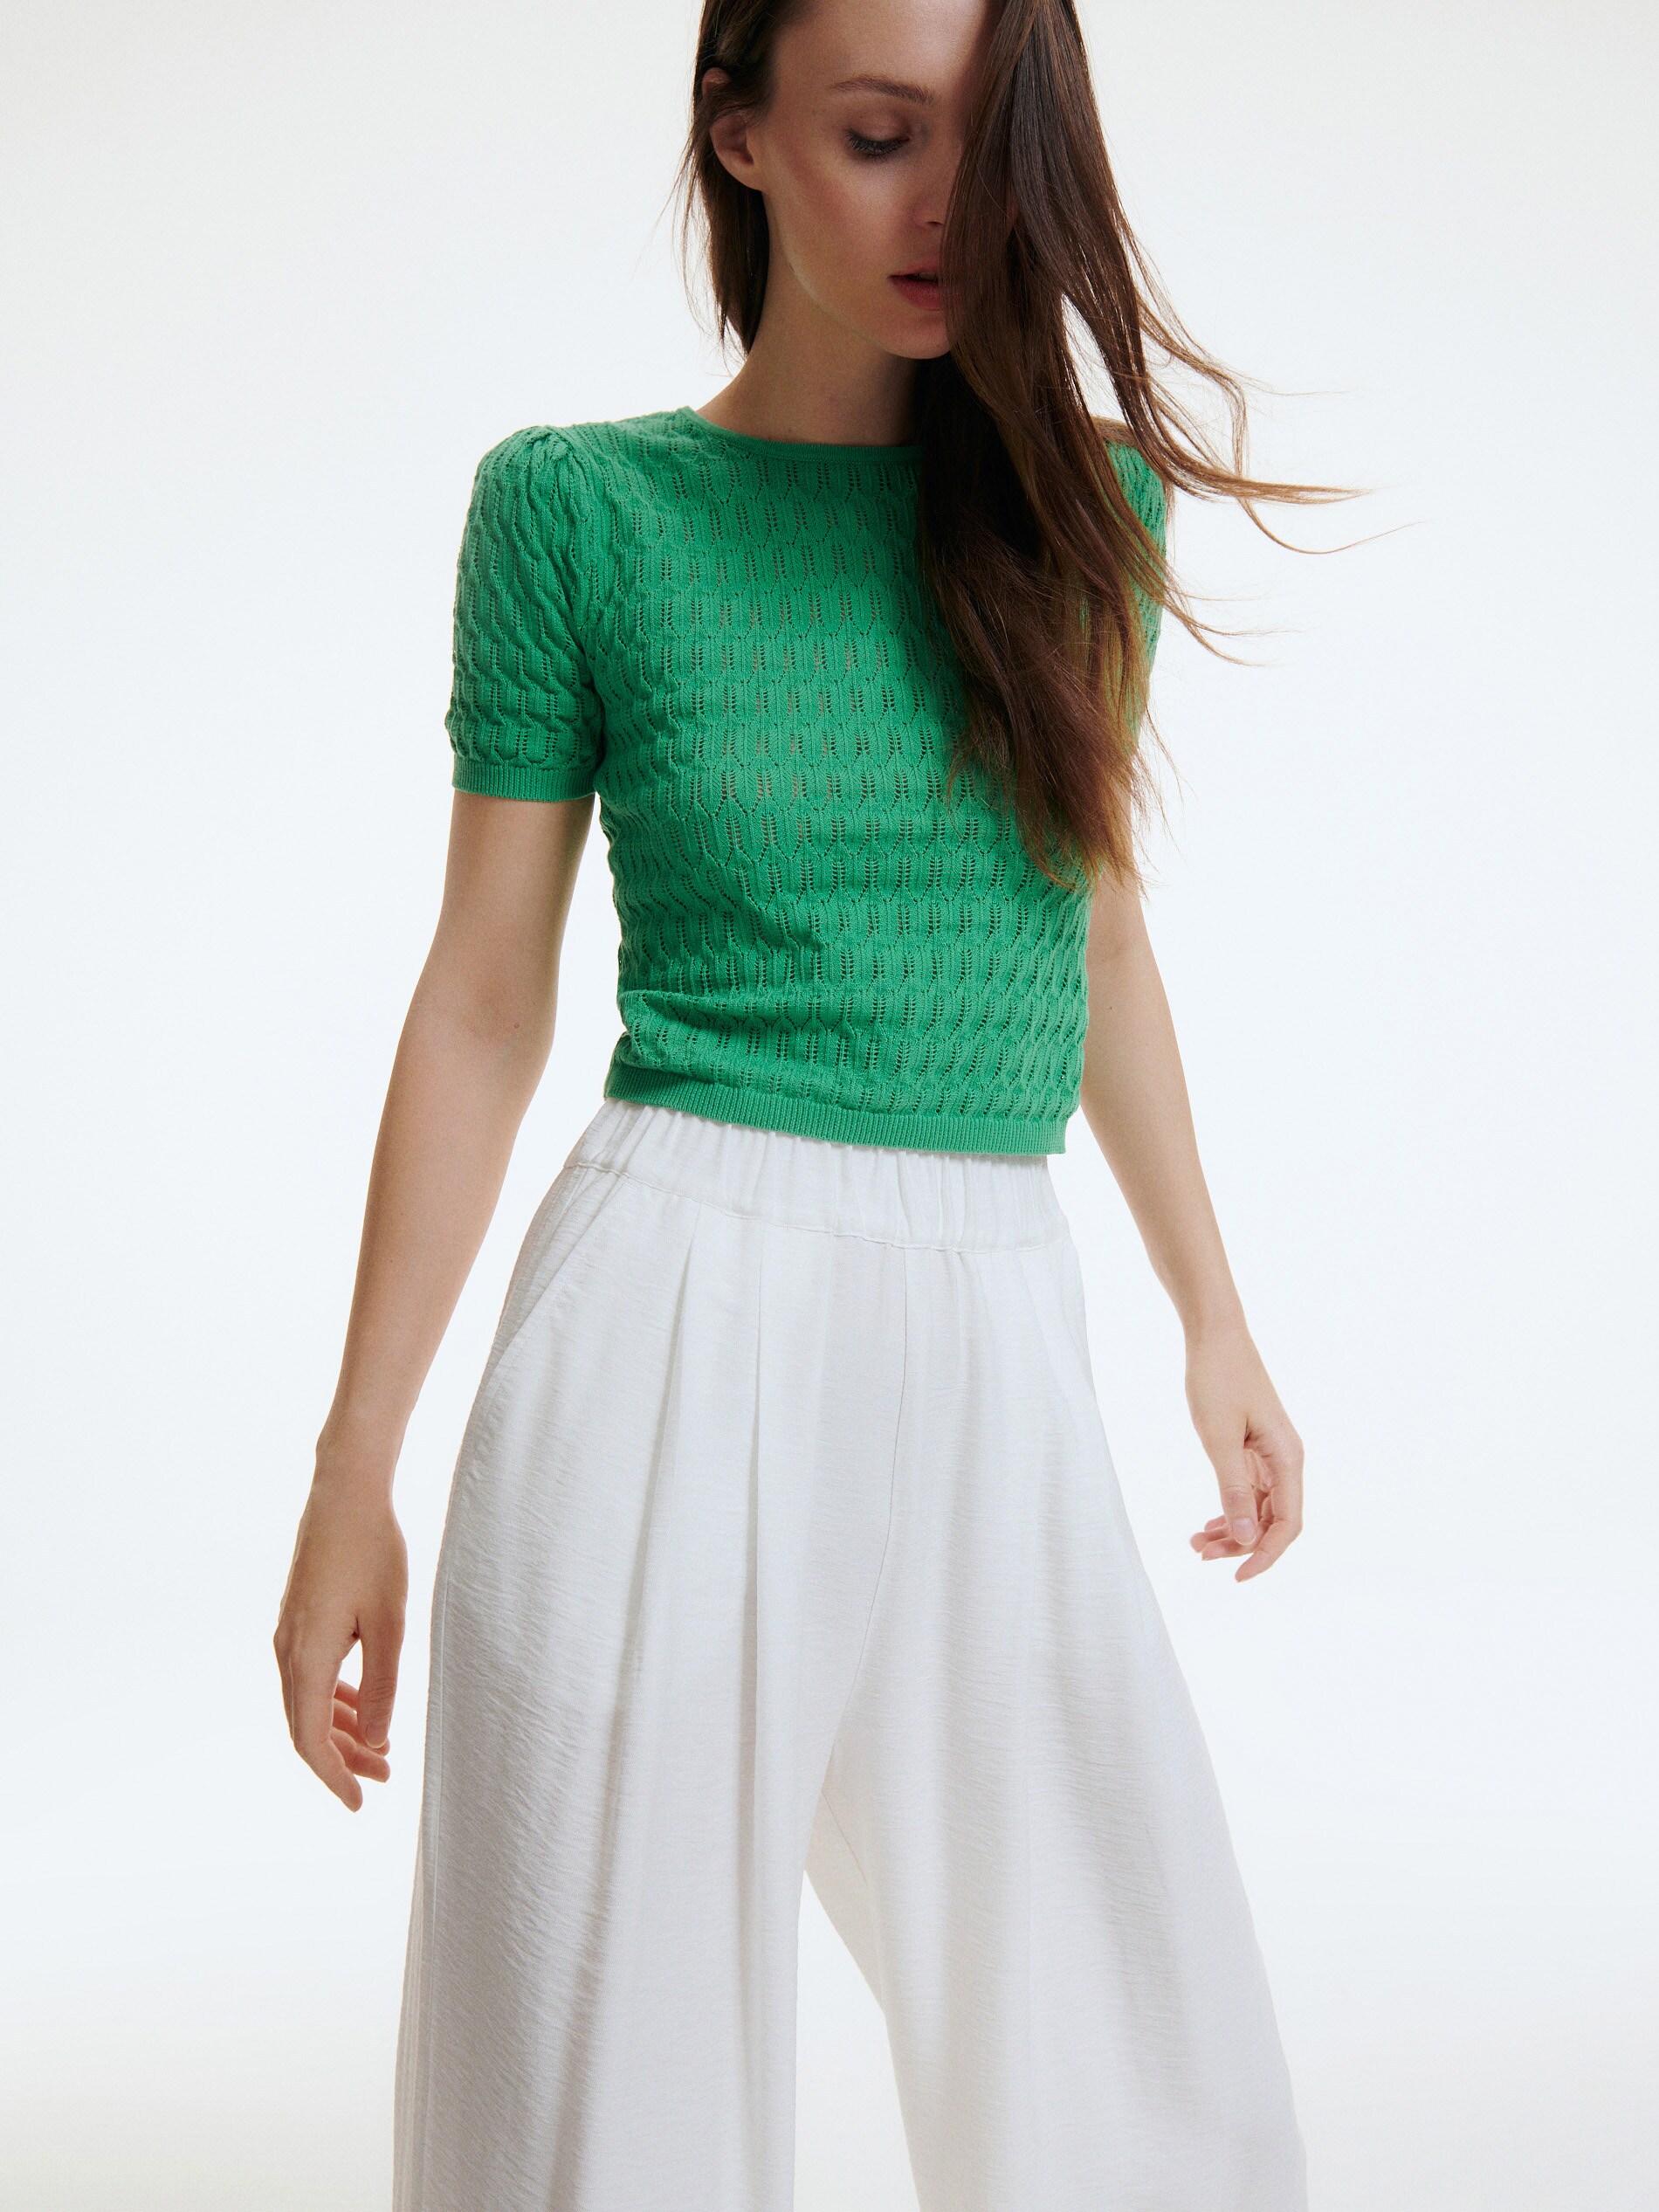 Short sleeved green openwork knit top with round neck and ribbed cuffs and hemline. Cropped close fit. 